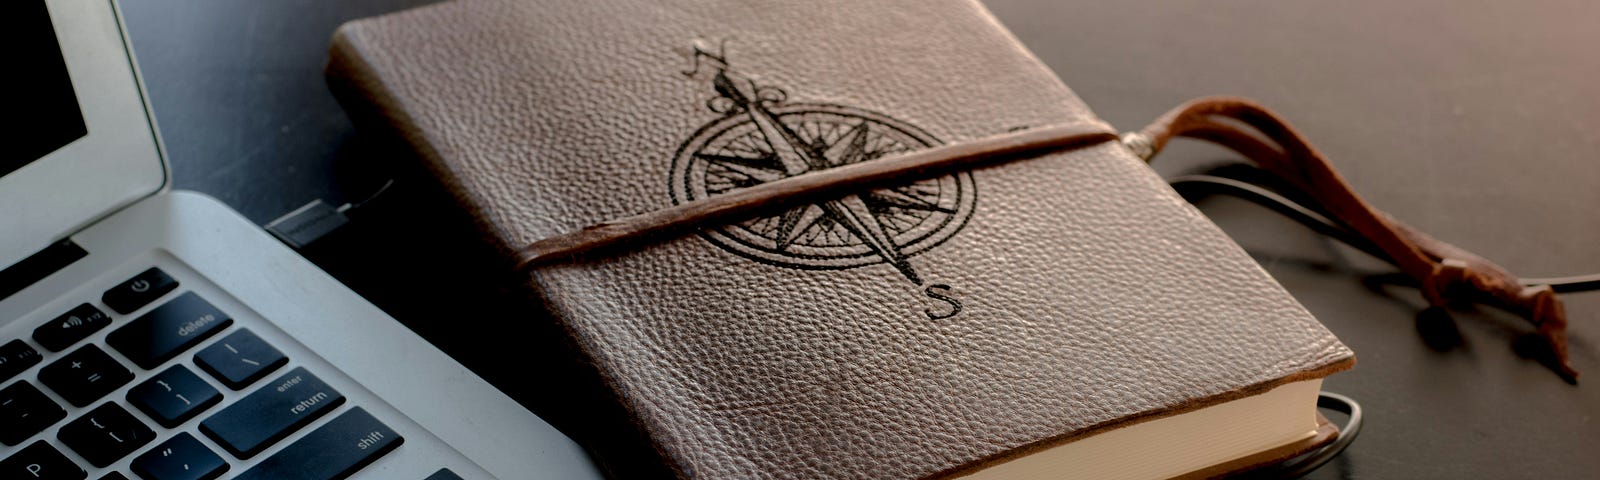 A leather journal with a picture of a compass, notebook, and two pens.